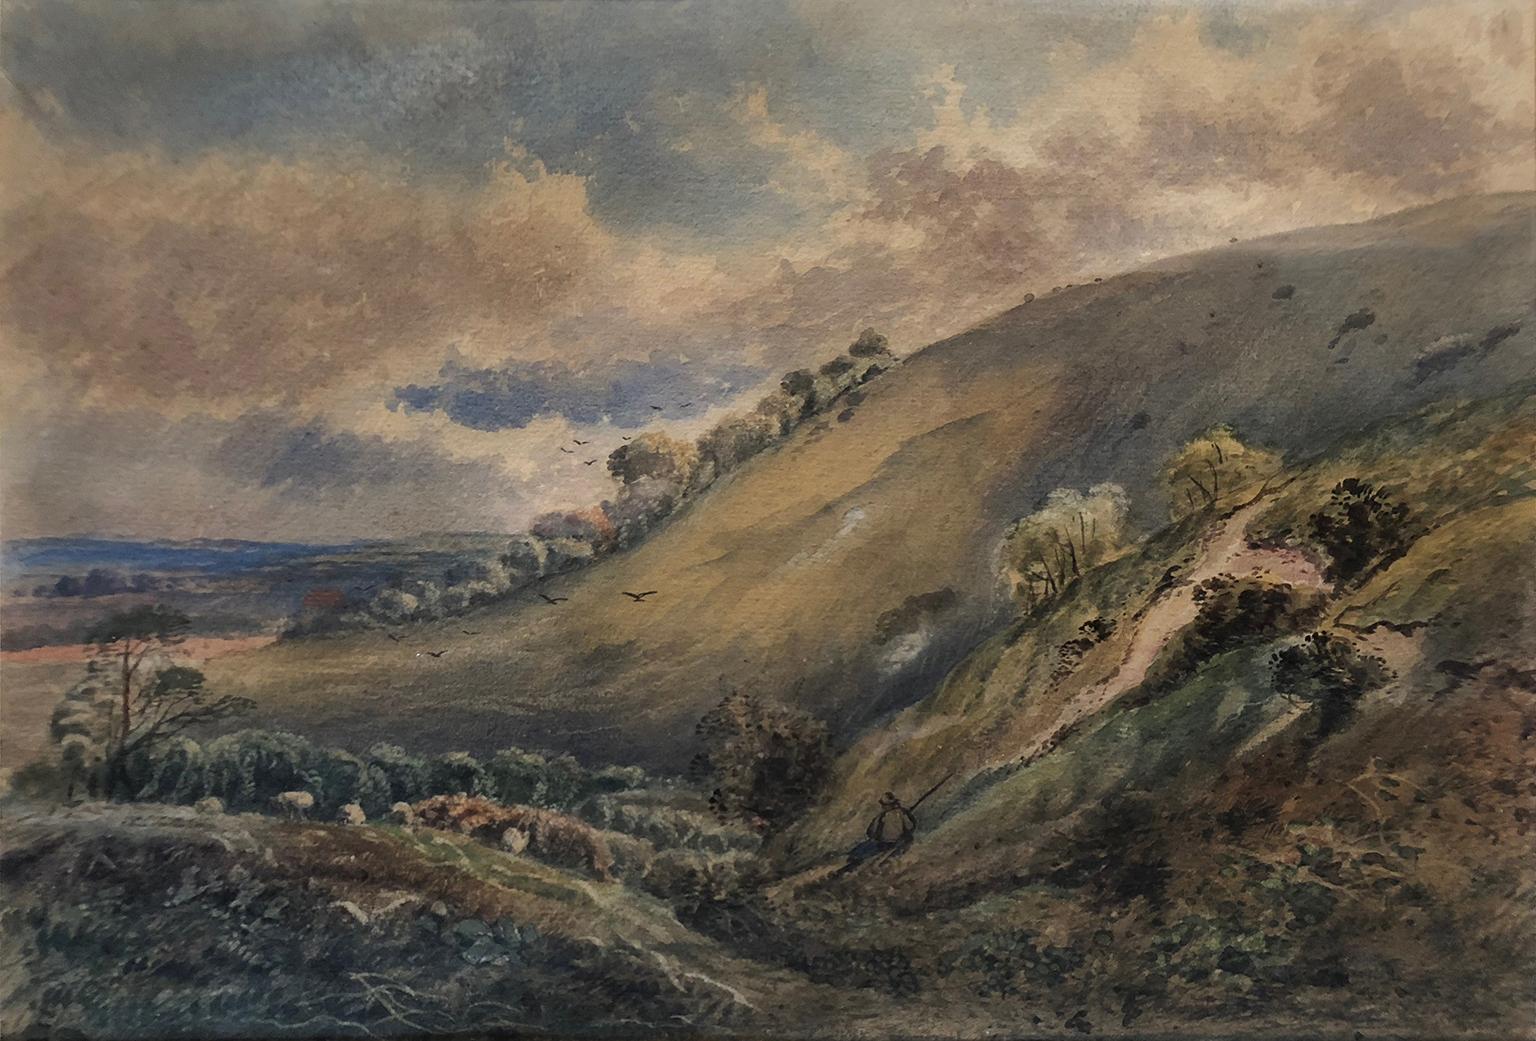 (Follower of) John Constable (1776-1837) Landscape with Shepherd and Sheep.
A lovely Period watercolour in the English tradition that shares attributes with that of Constable. Most likely executed by an inspired contemporary of the time. 

John